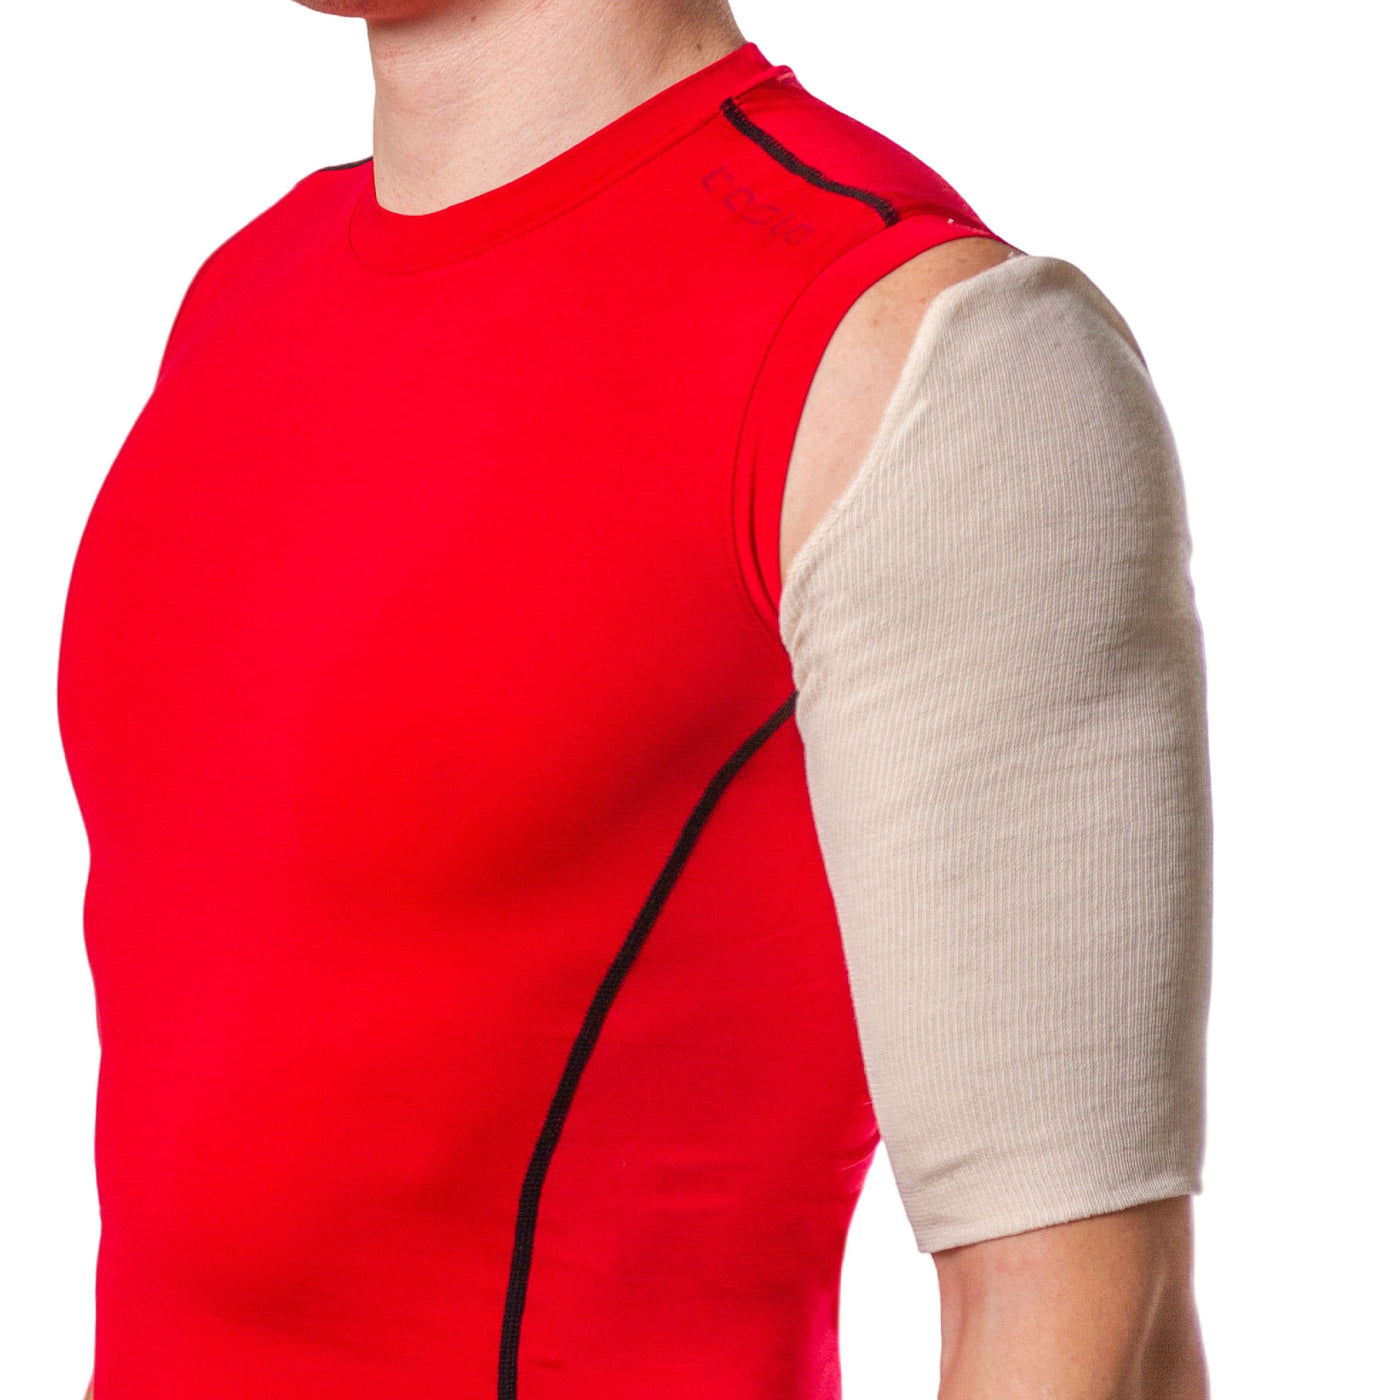 Stockinette Shoulder Sleeve for Sarmiento Humeral Fracture Brace